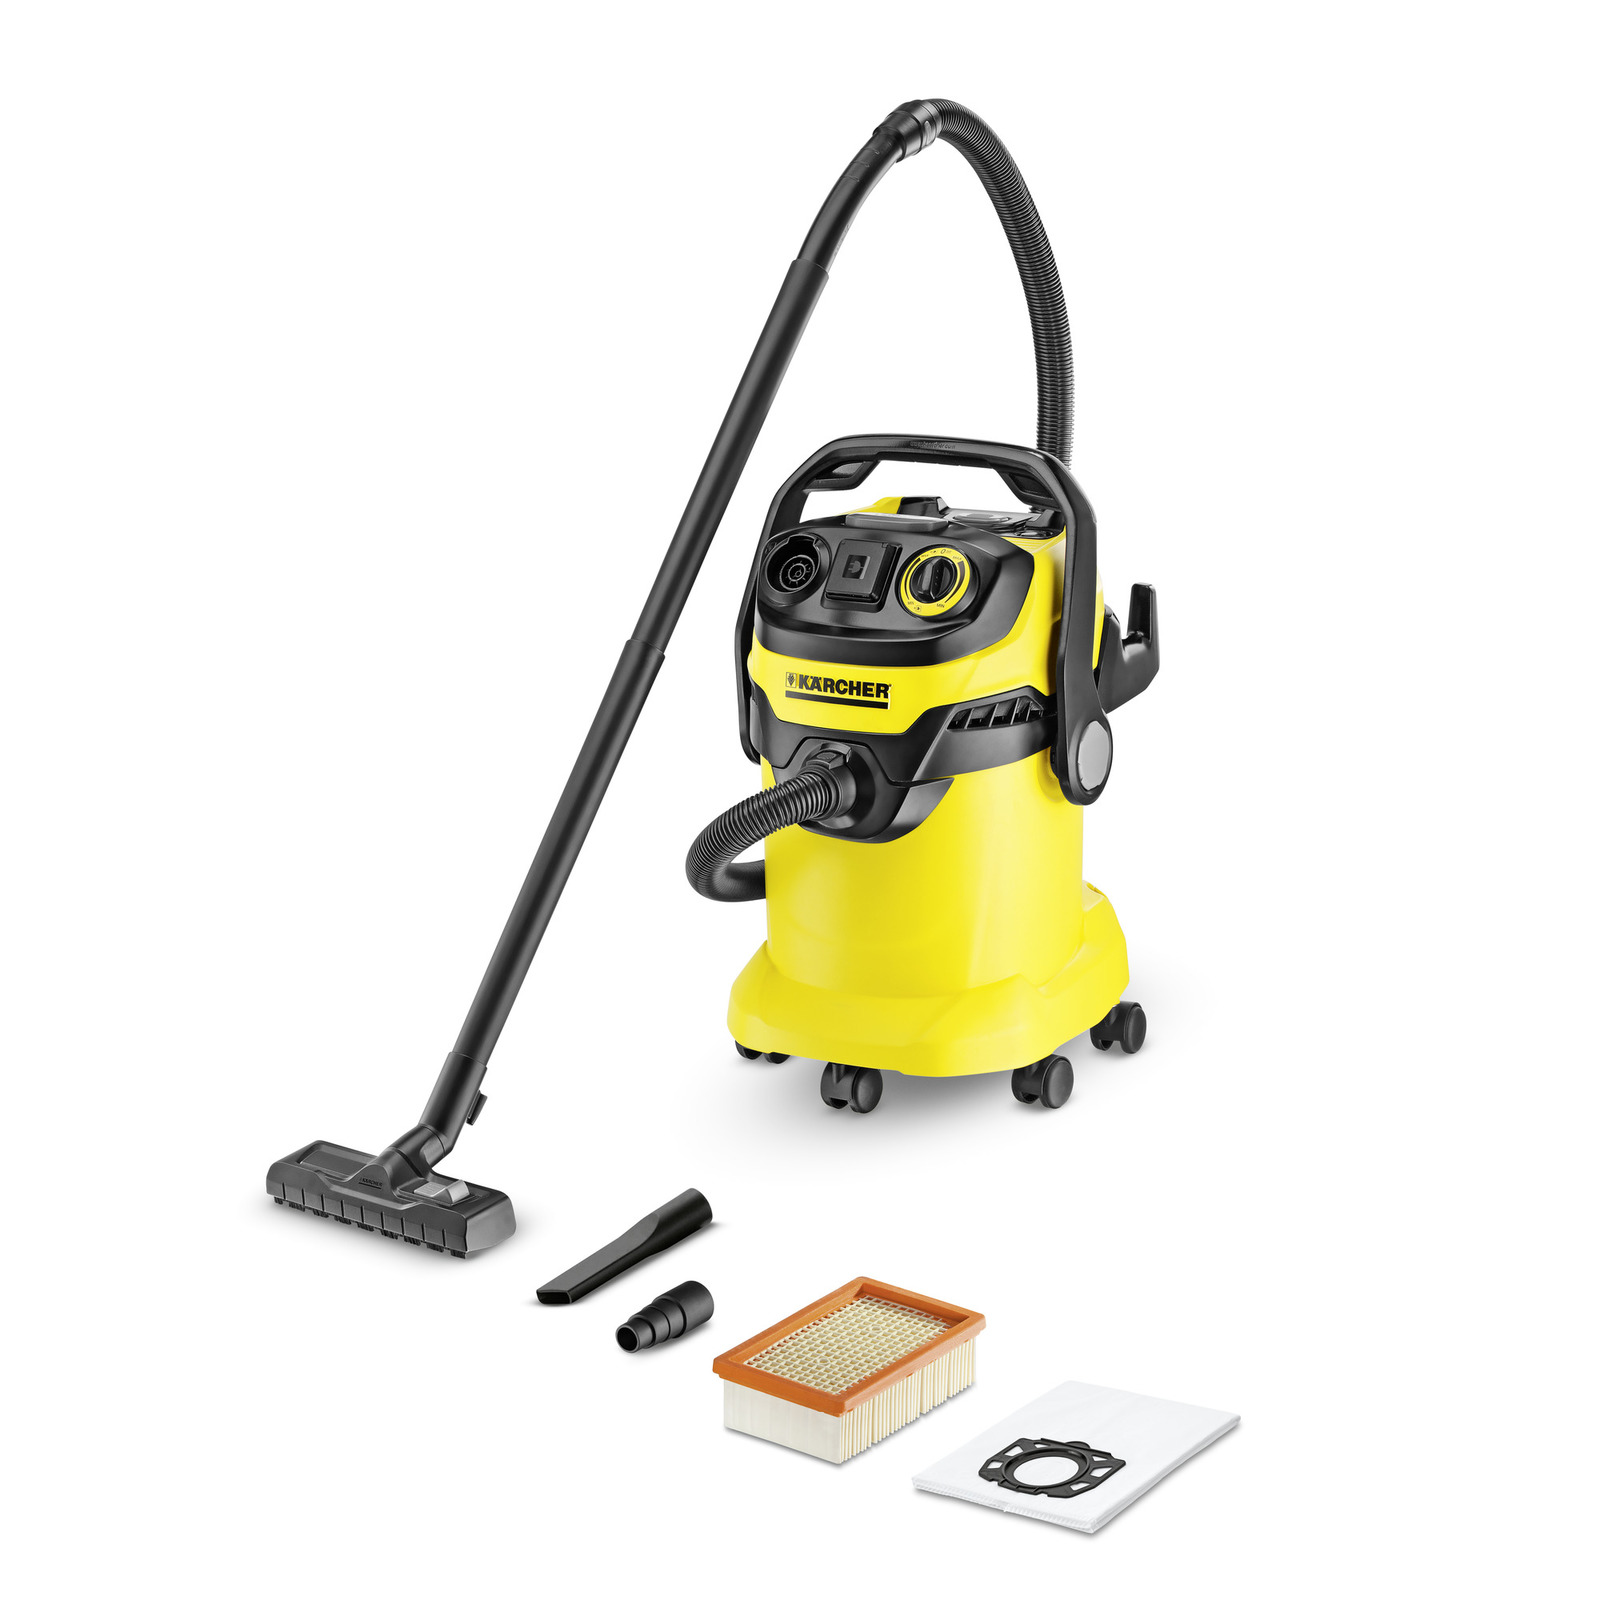  Kärcher - WD 5/P Multi-Purpose Wet-Dry Vacuum Cleaner - 6.6  Gallon - With Attachments – Blower Feature, Semi-Automatic Filter Cleaning,  Space-Saving Design - 1100W - 2022 Edition,Yellow : Home & Kitchen